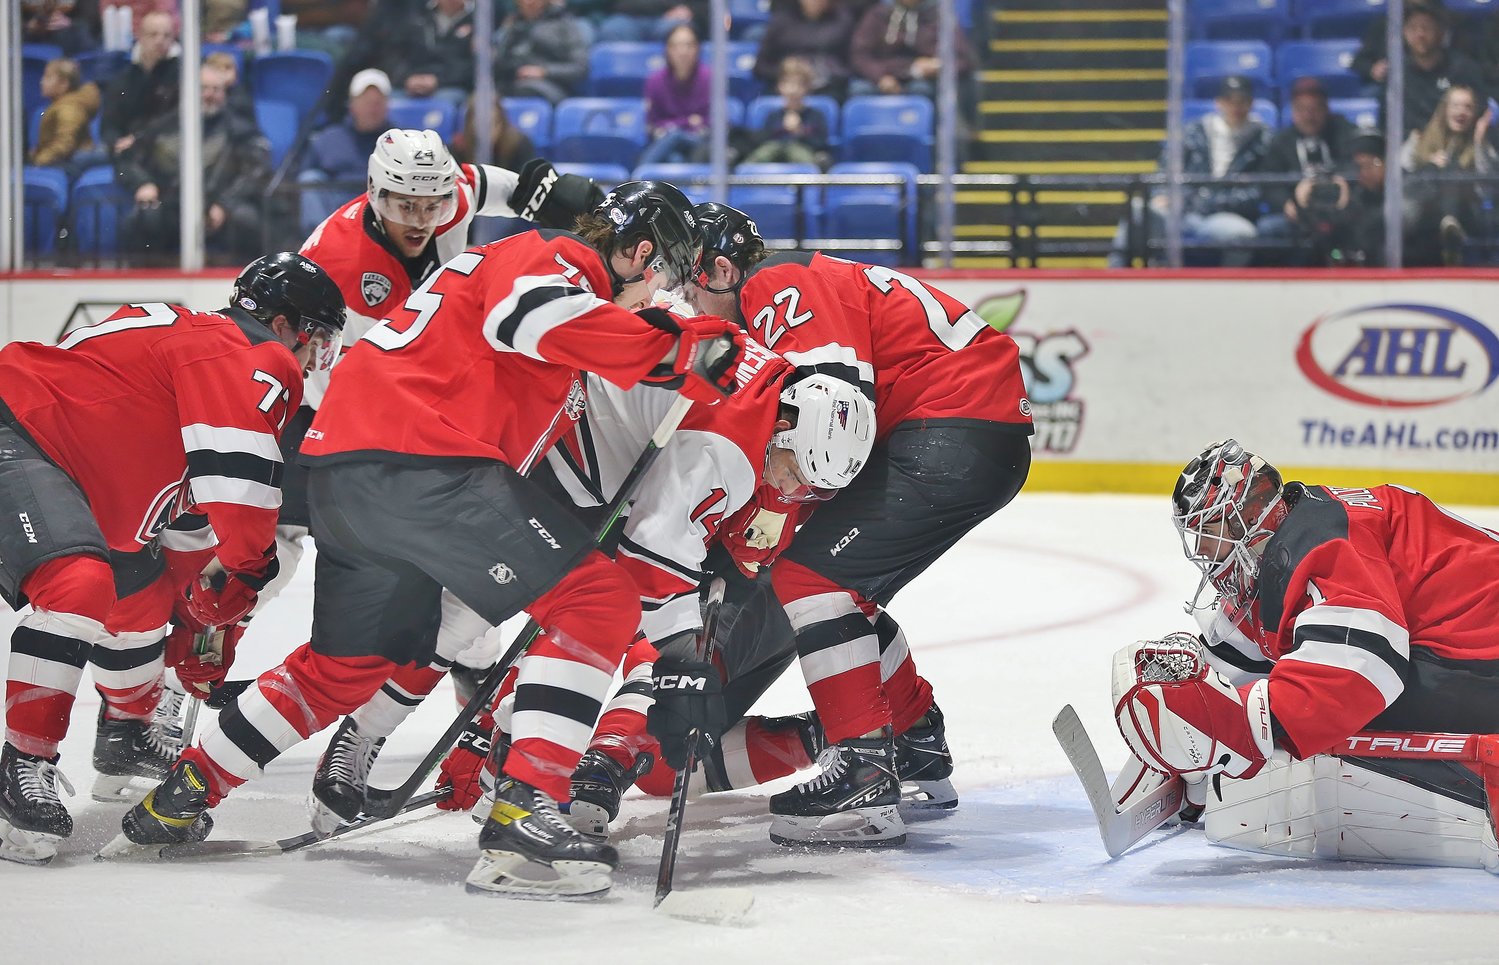 Isaac Poulter looks through a scrum in front of the net on Friday against the Charlotte Checkers at the Adirondack Bank Center. Poulter made 28 saves in a solid performance, though Charlotte won 2-1.